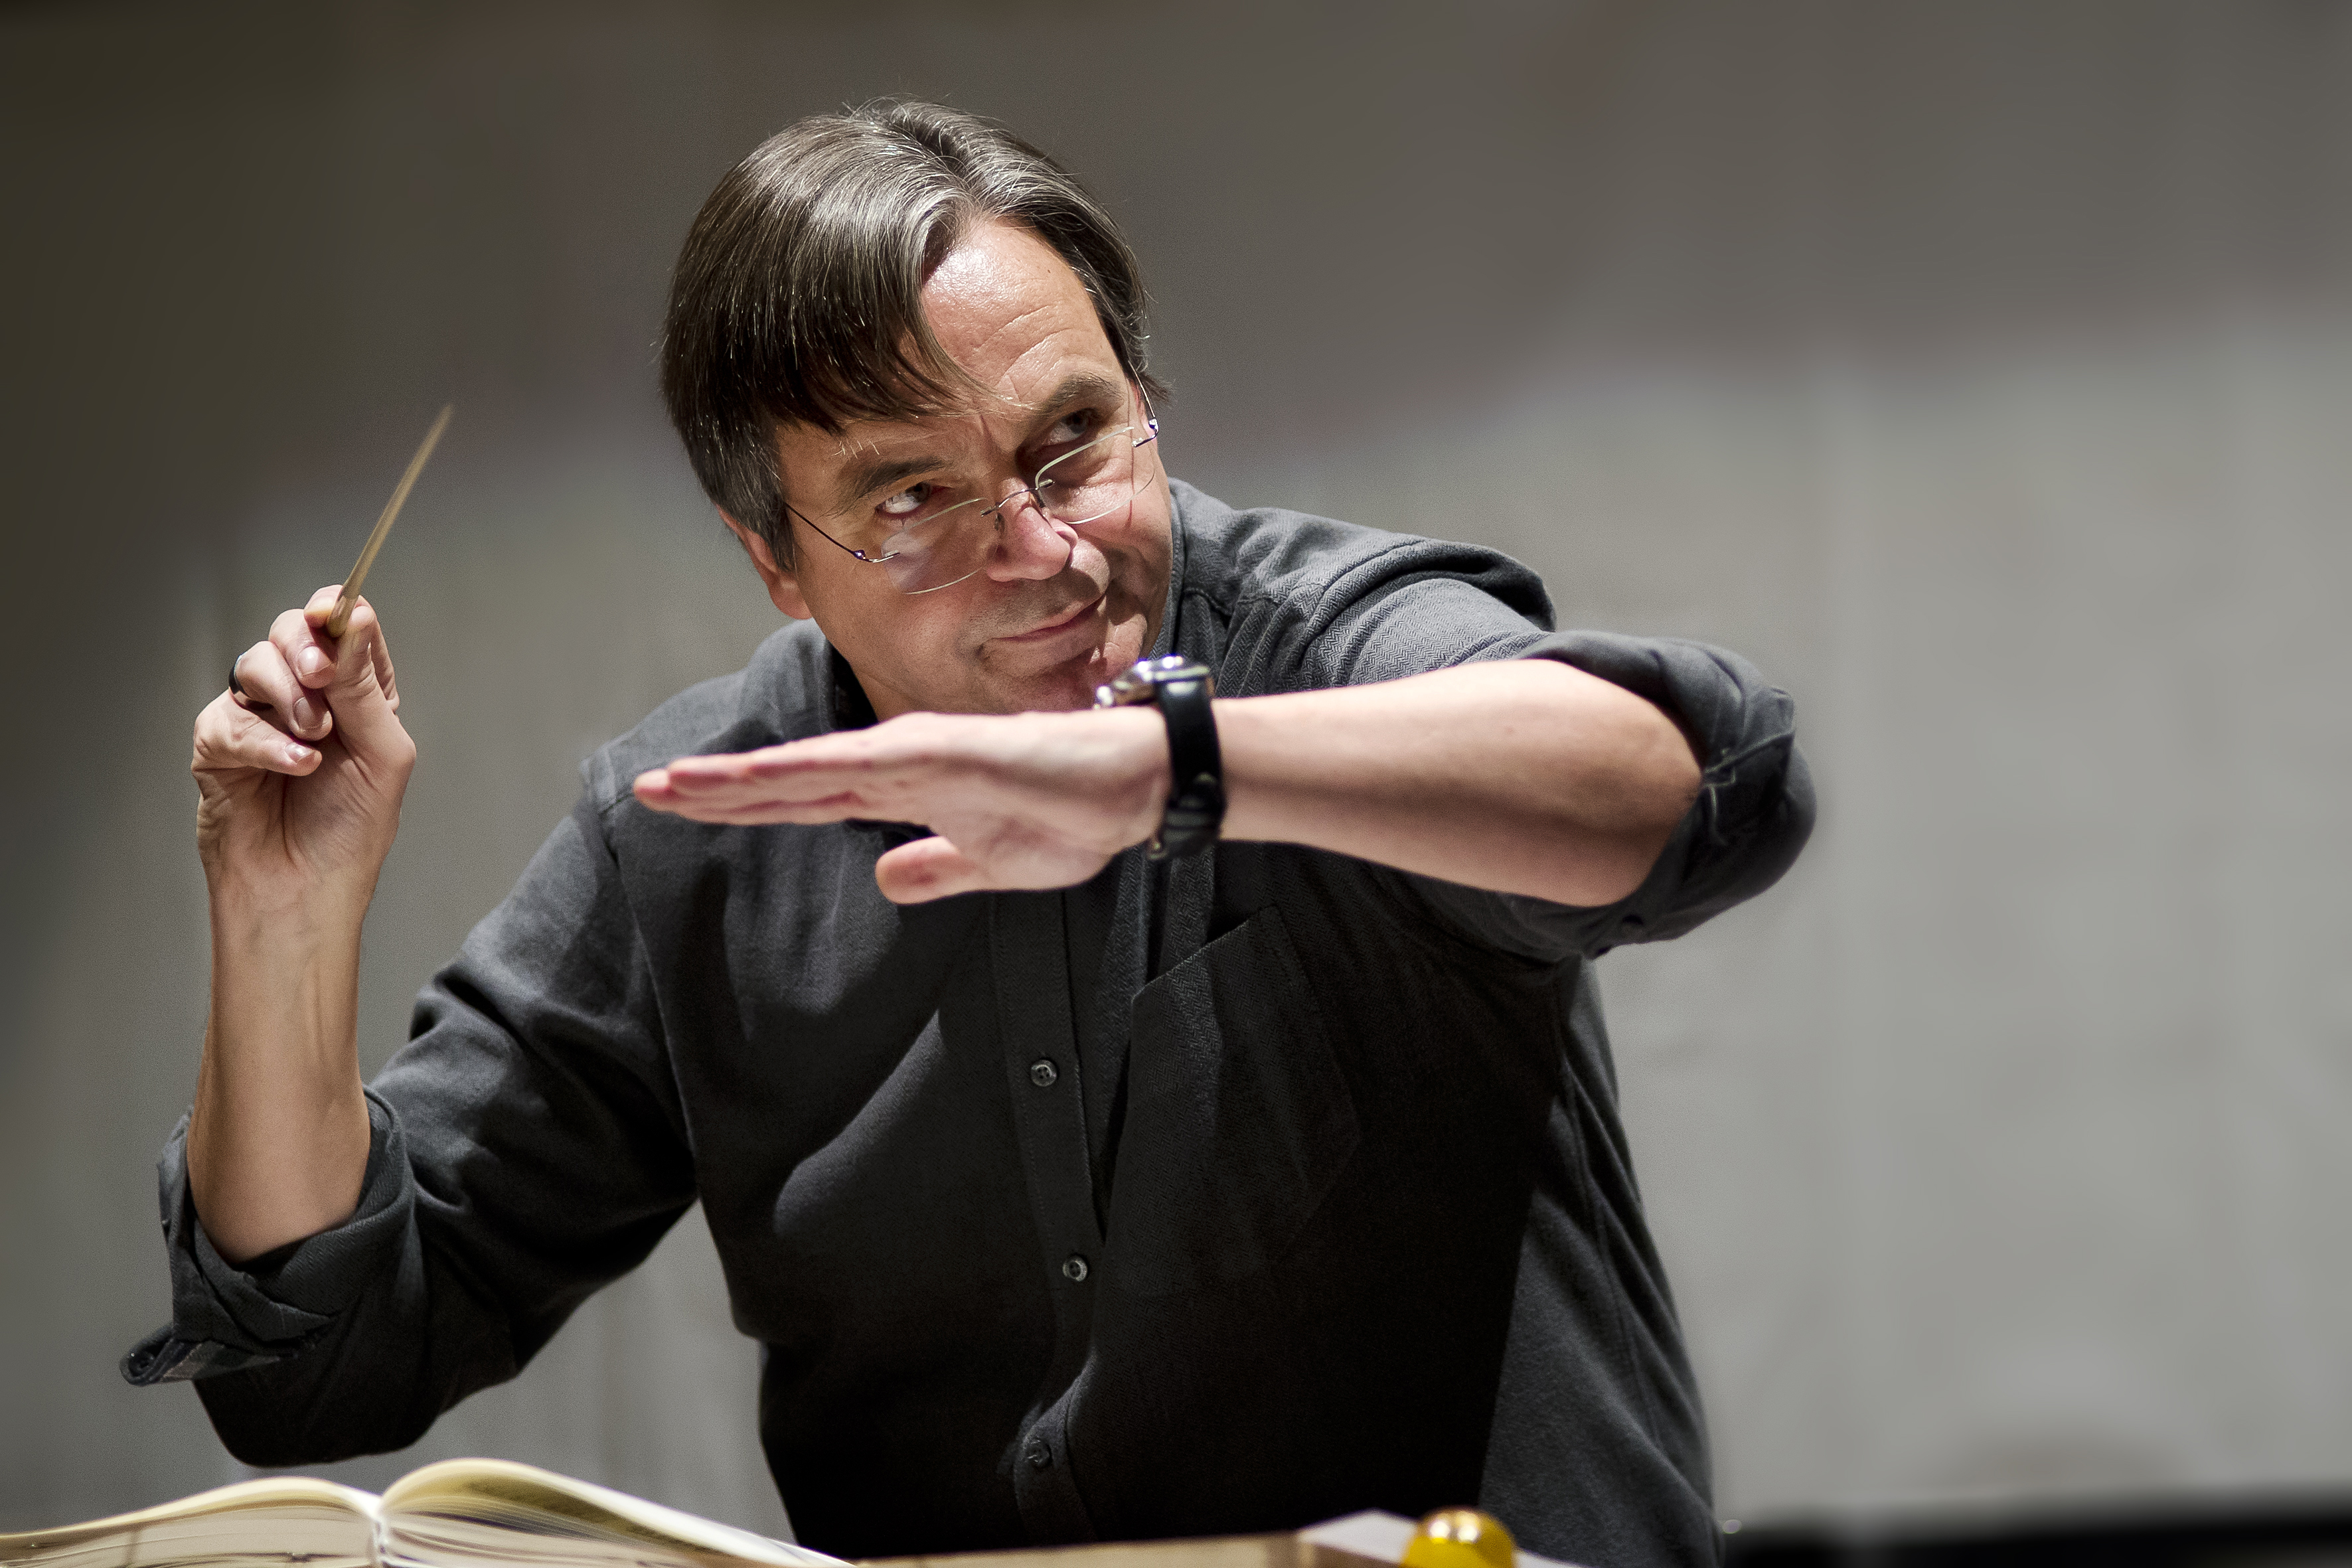 Conductor Ulf Schirmer who recorded the Lehár series for cpo; he is also GMD at Opera Leipzig. (Photo: Kirsten Nijhof/Oper Leipzig)